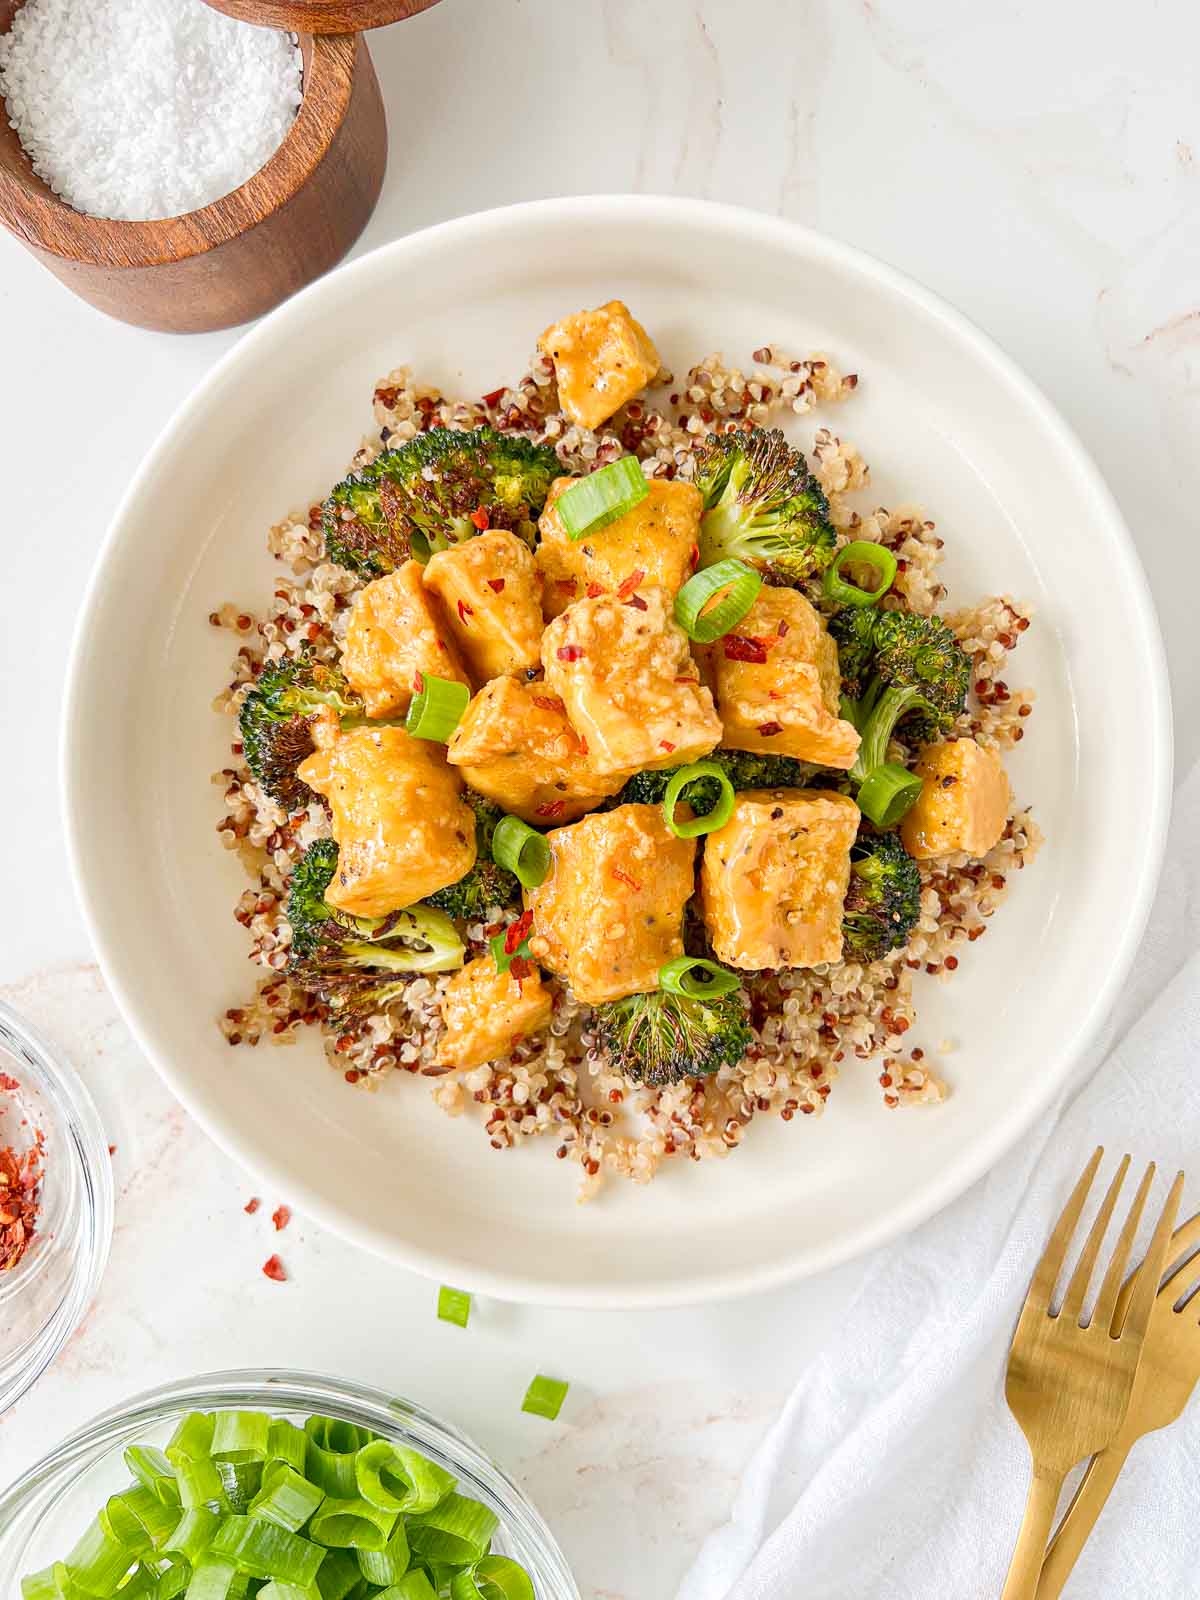 Plate of quinoa and roasted broccoli topped with vegan honey mustard tofu and garnished with green onions and red pepper flakes with salt well and gold forks nearby.